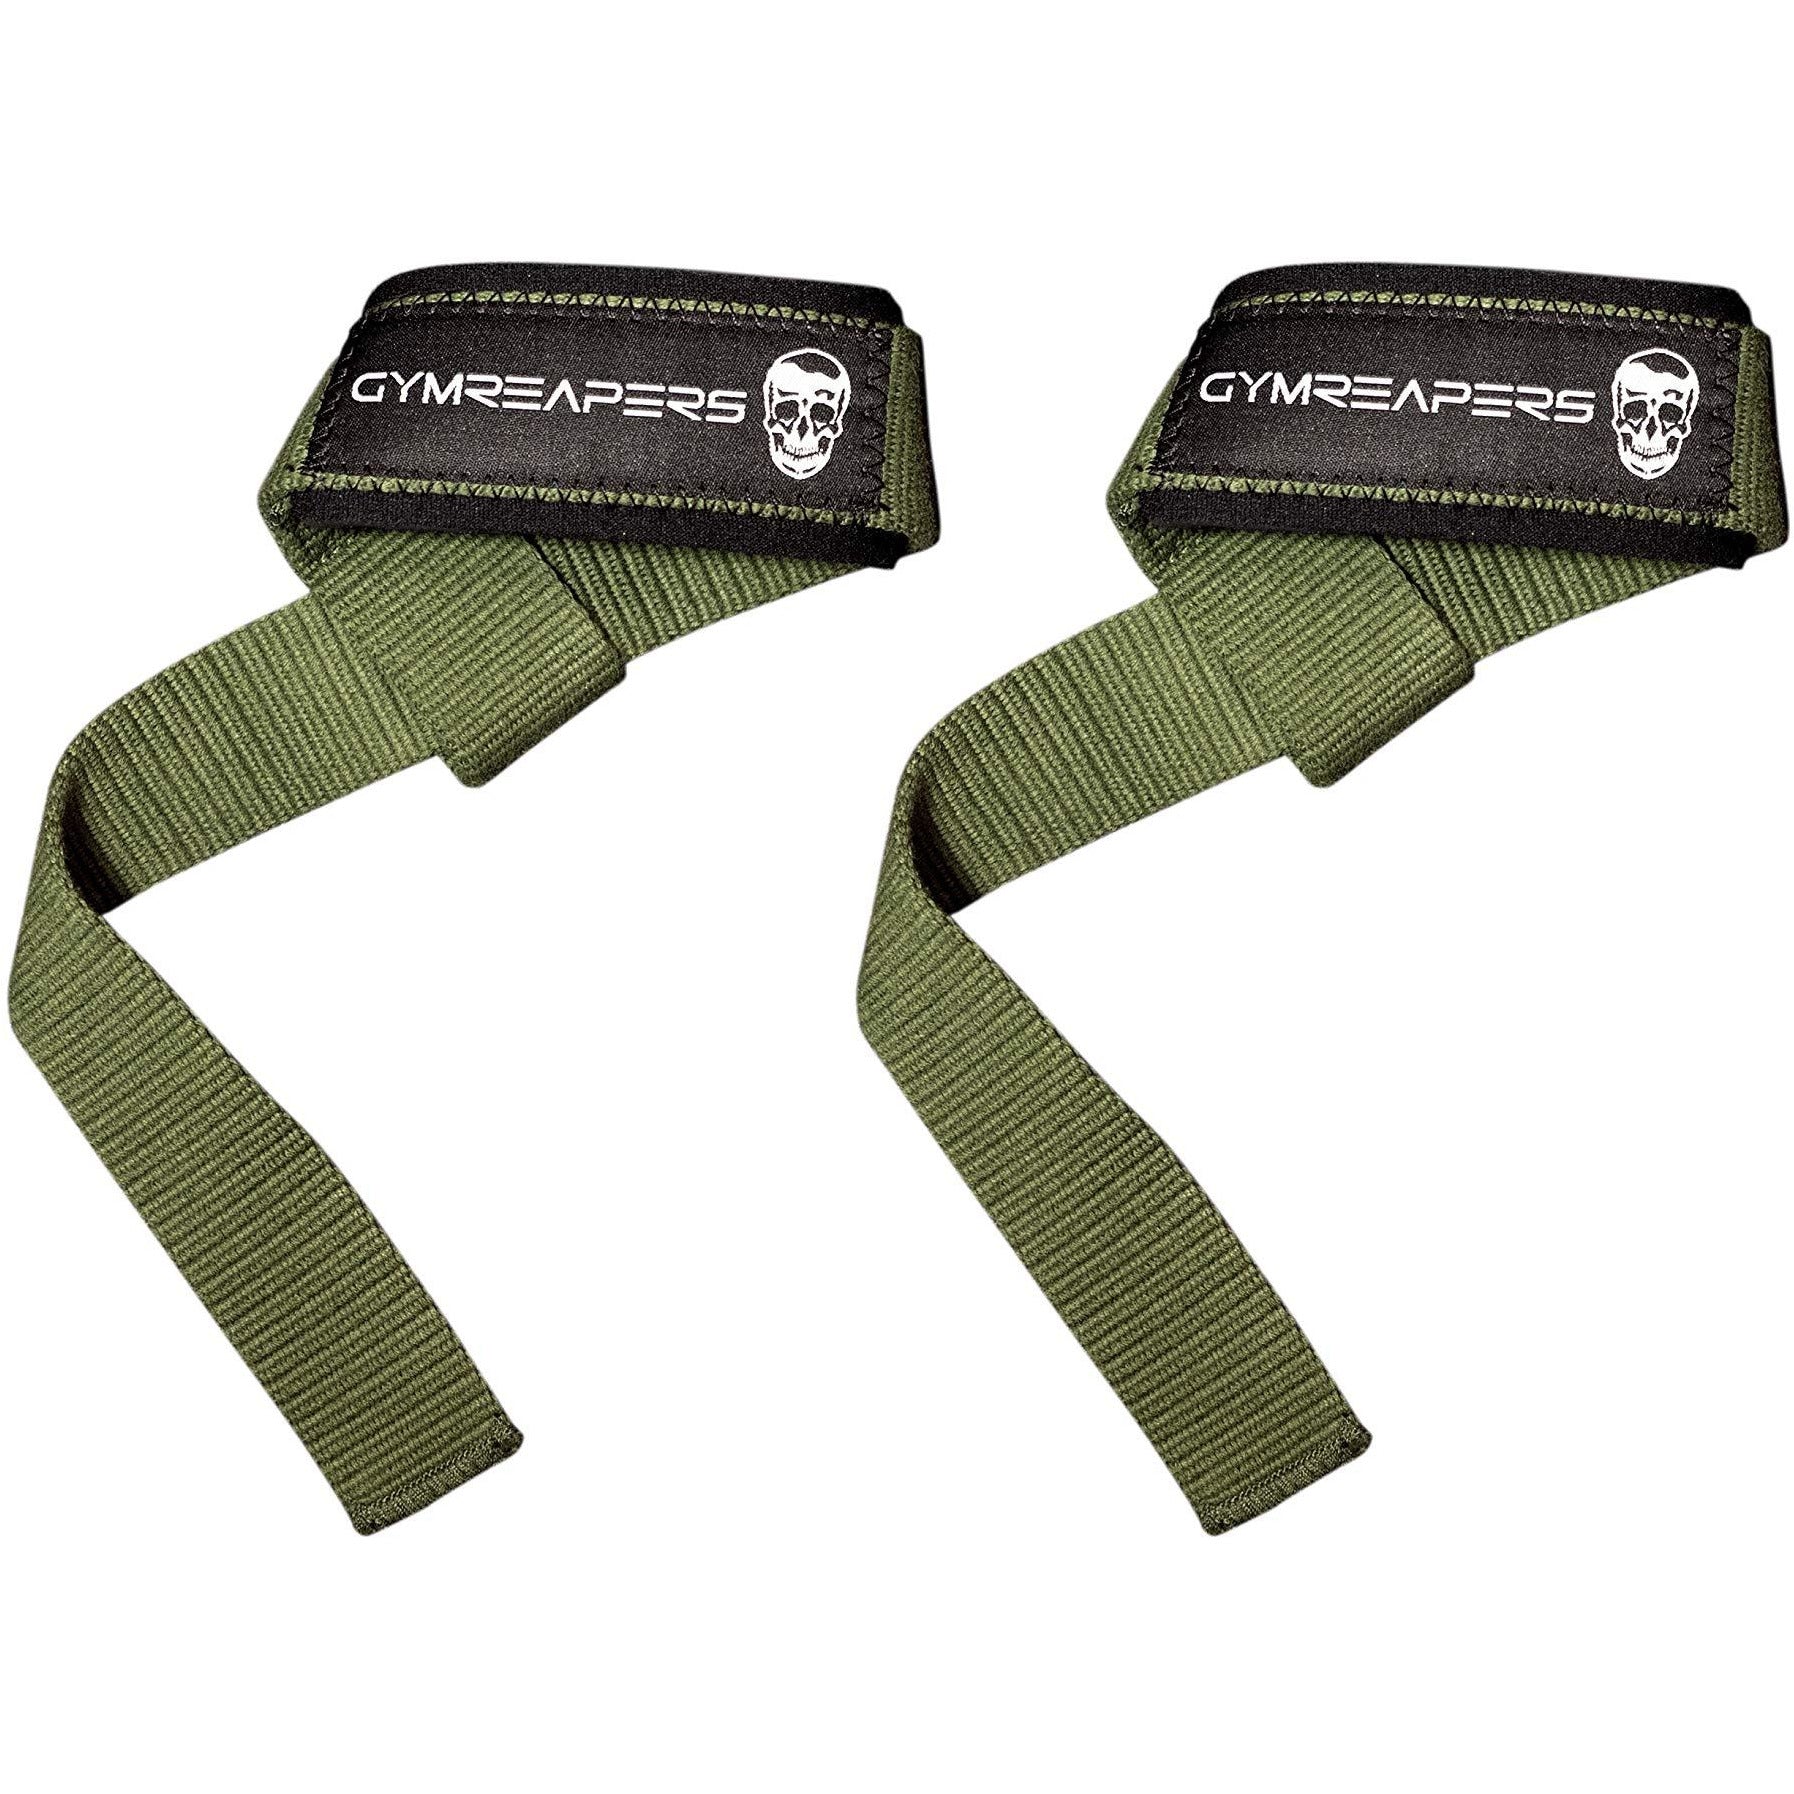 Lifting Wrist Straps for Weightlifting, Bodybuilding, Powerlifting, Strength Training, Deadlifts - Padded Neoprene with 18" Cotton (Military Green)